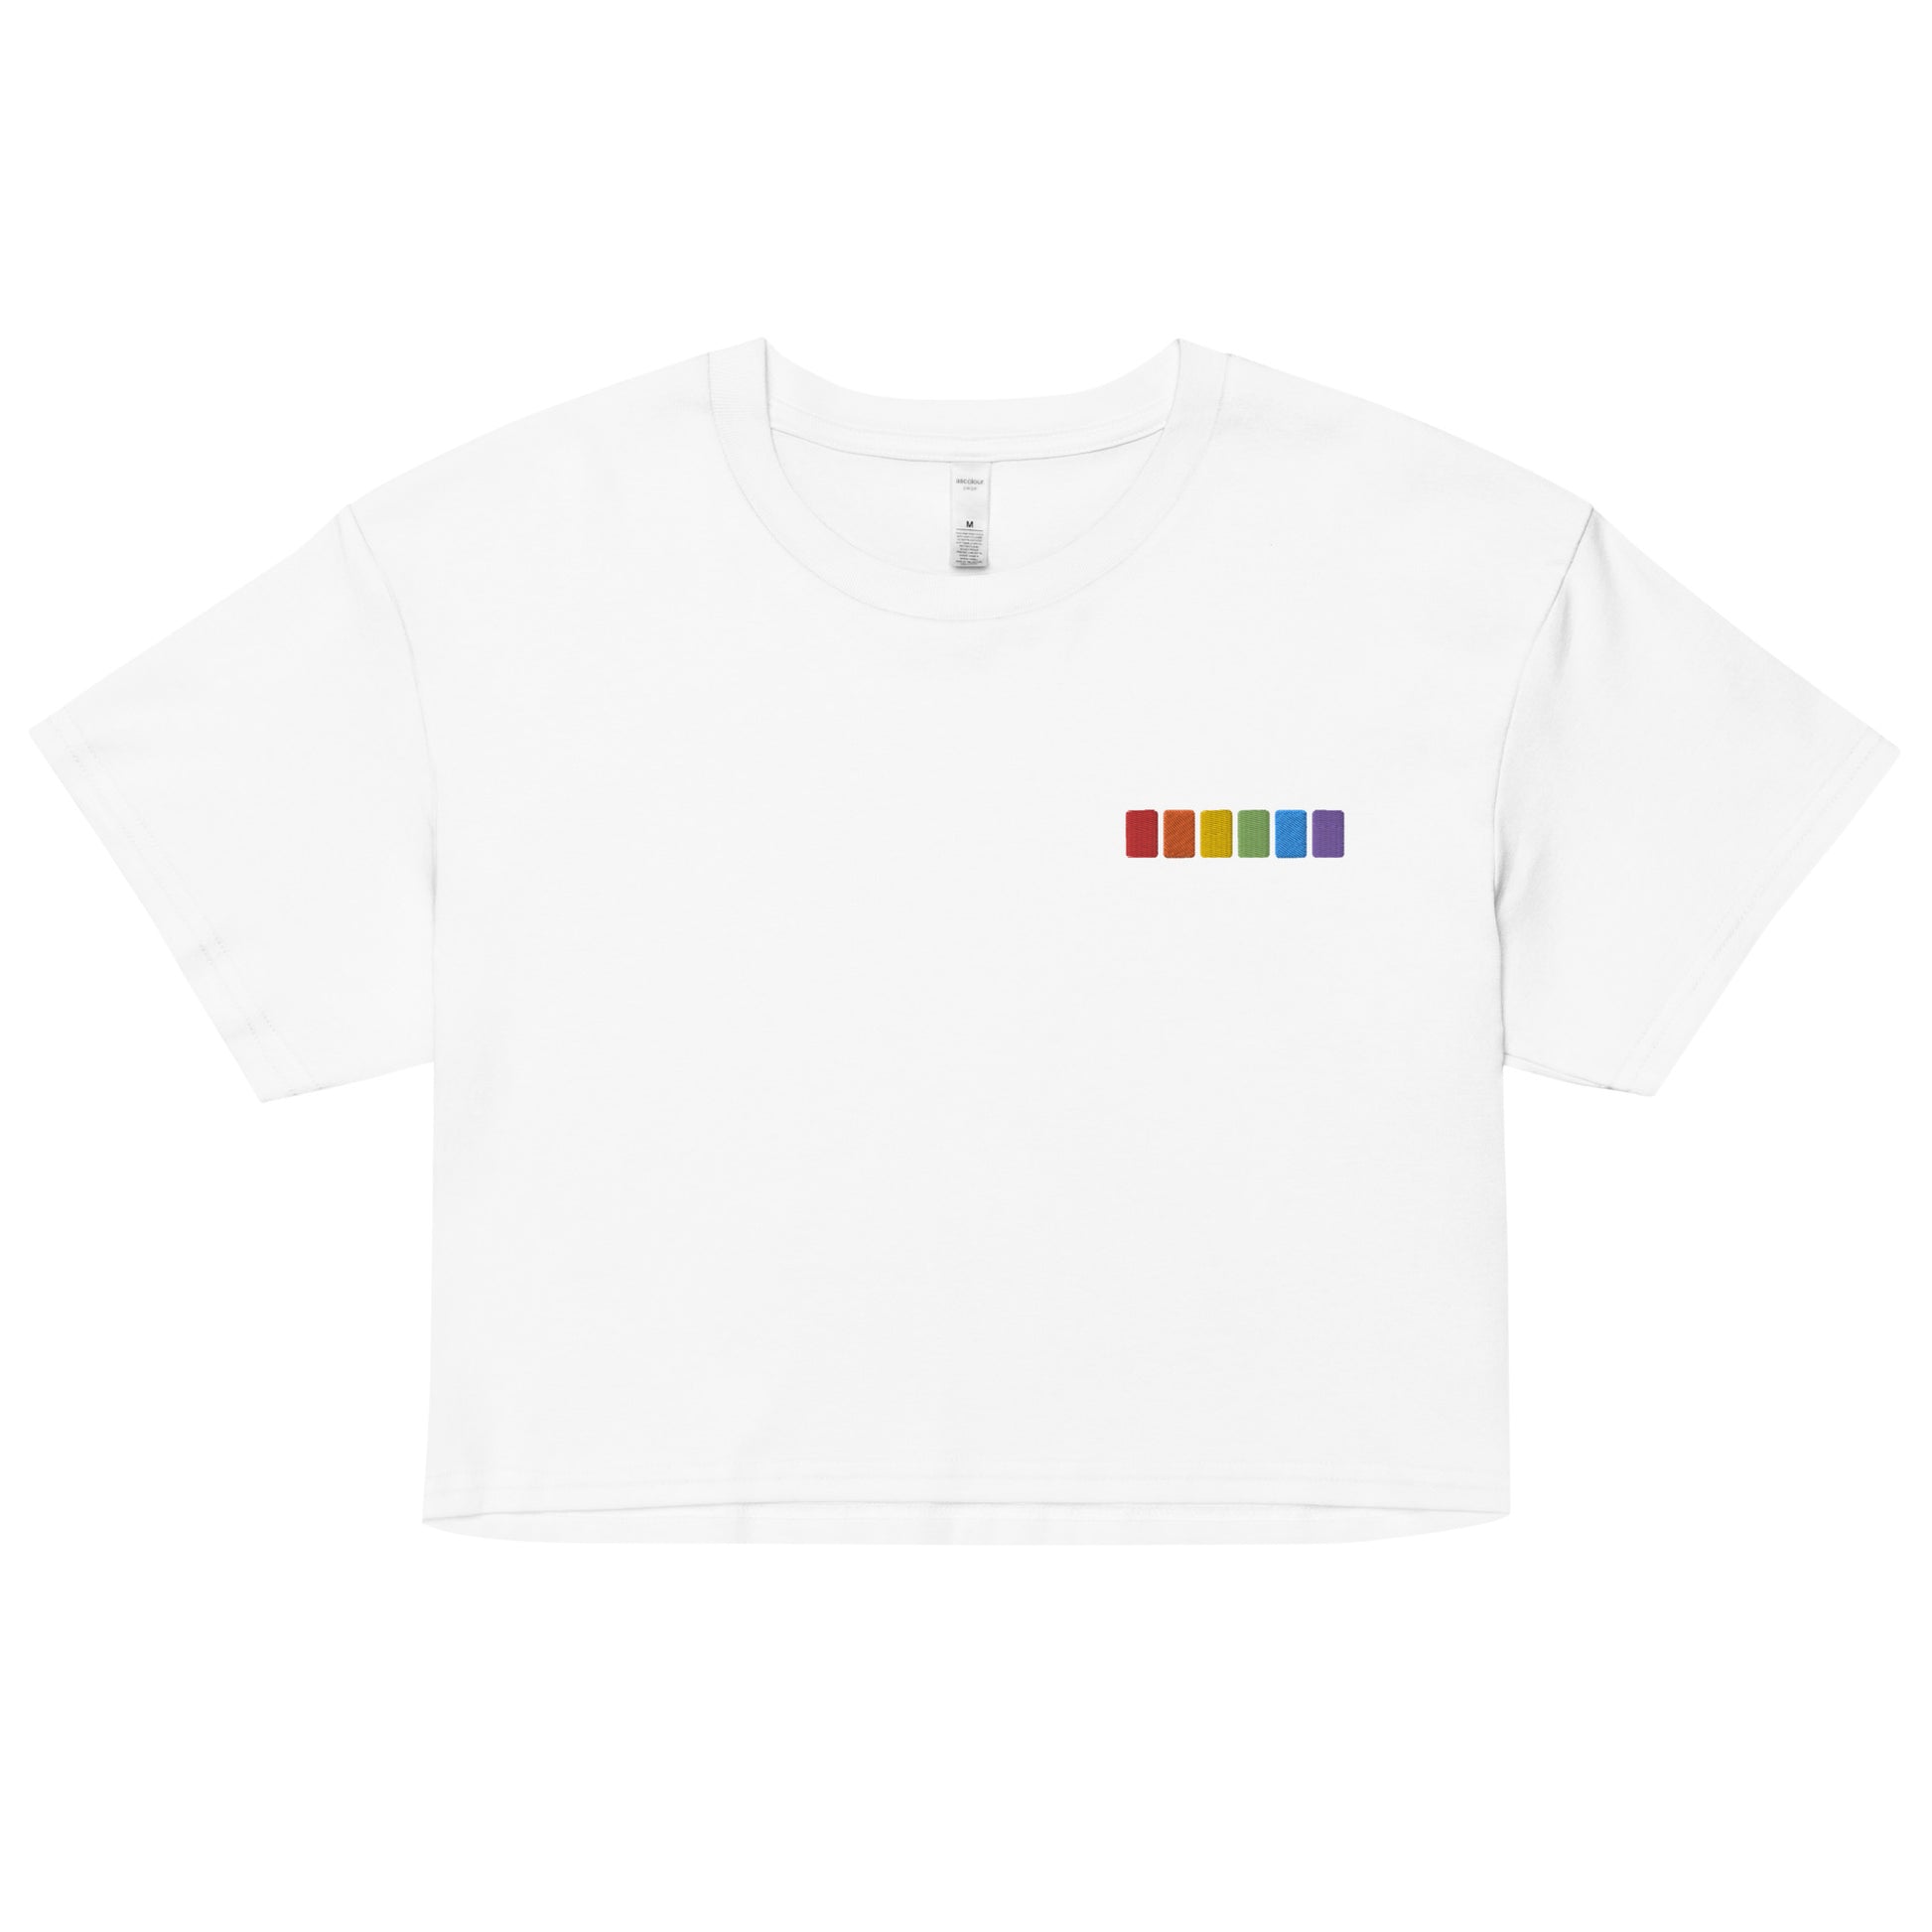 A relaxed, modest white crop top features a subtle rainbow squares embroidery. Adding a touch of rainbow to your look—a playful celebration of lgbtq culture! Made from 100% combed cotton. Available in Extra Small, Small, Medium, Large, Extra Large.